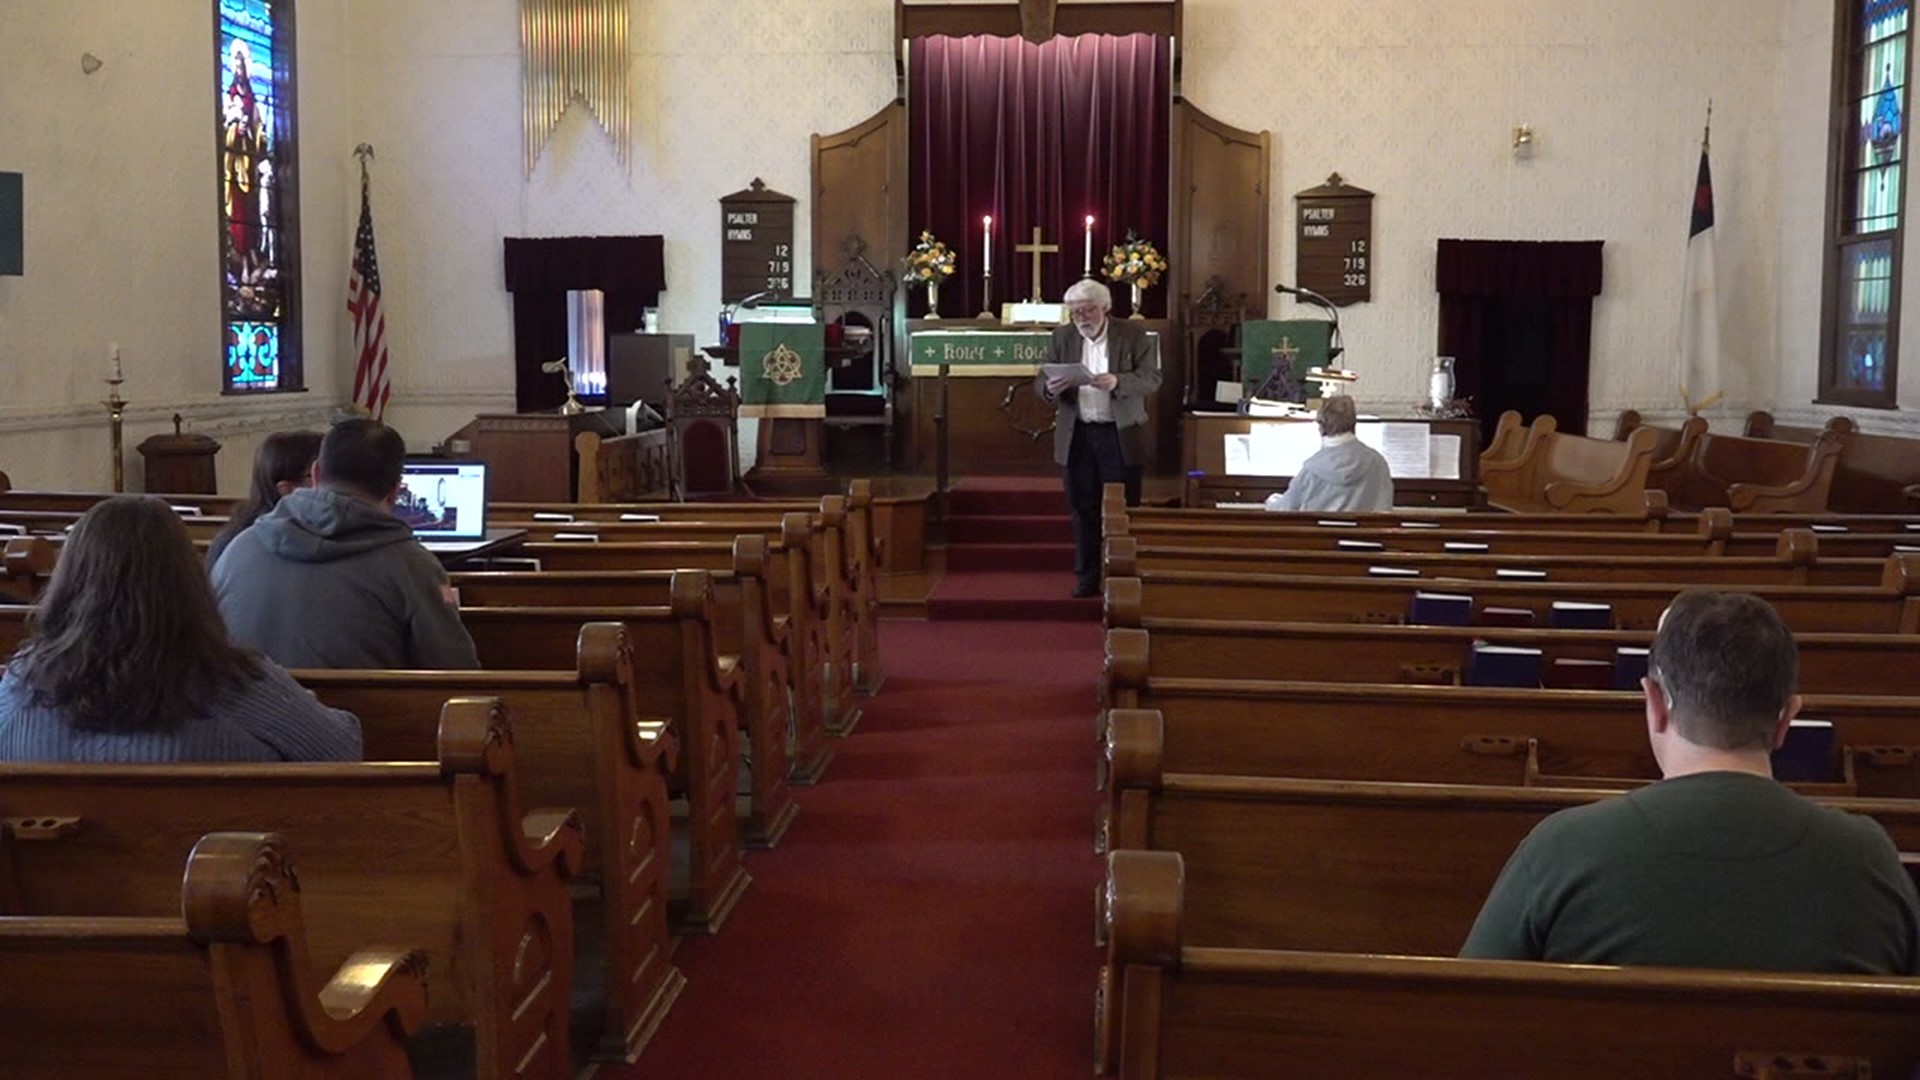 The First Presbyterian Church of Mahanoy City will be holding its last service in March.